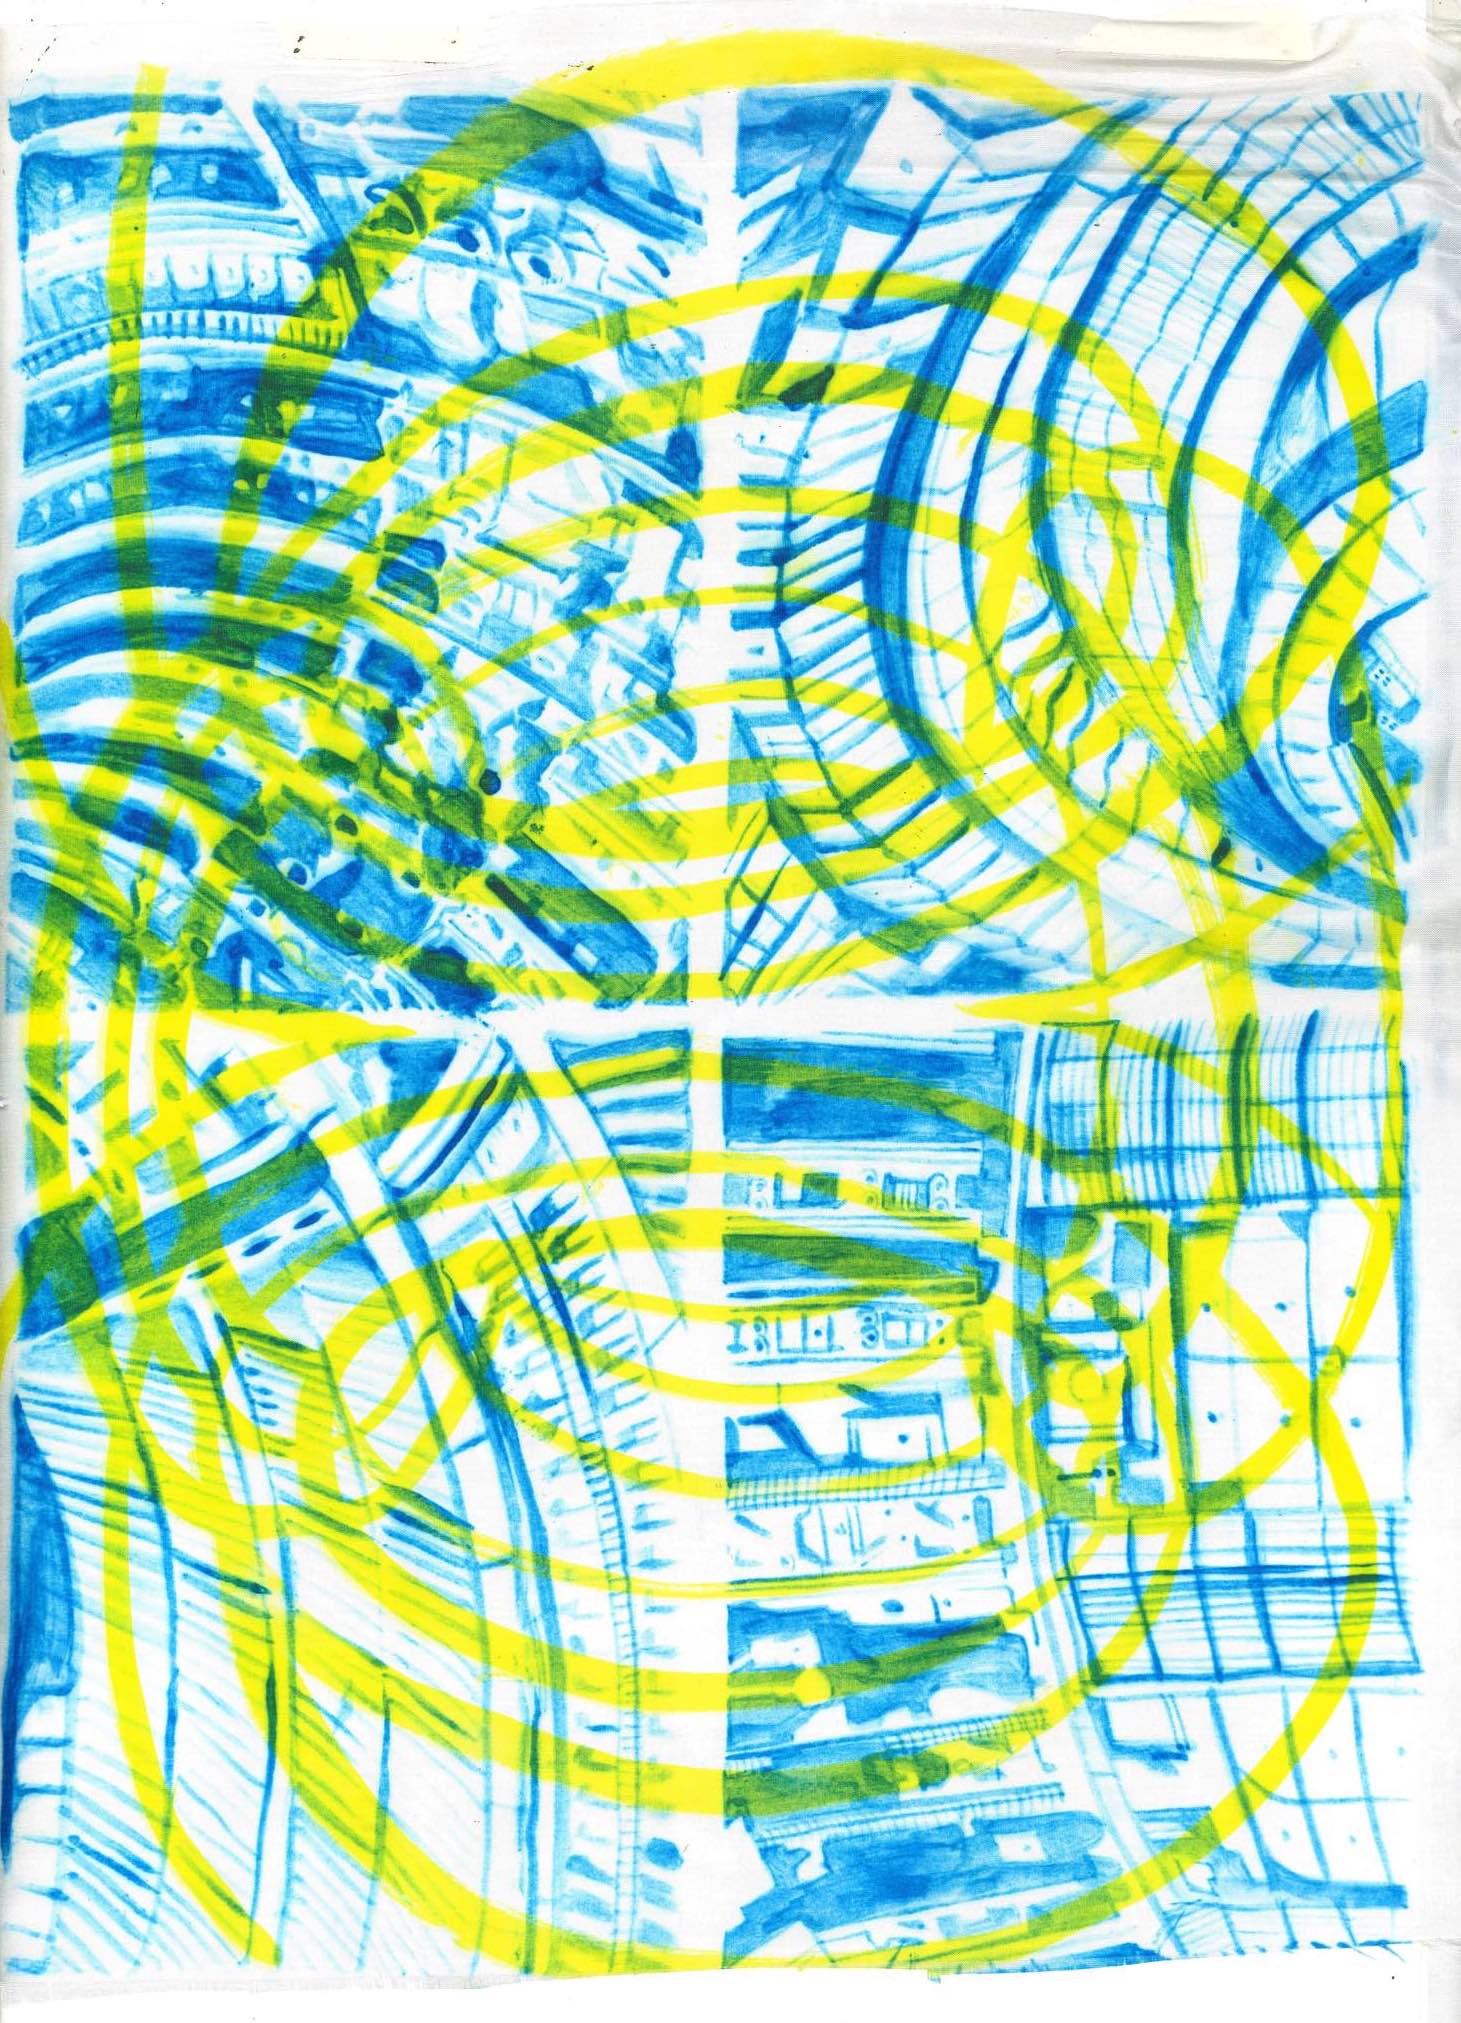 Abstract compositions of fusion reactor in yellow and blue